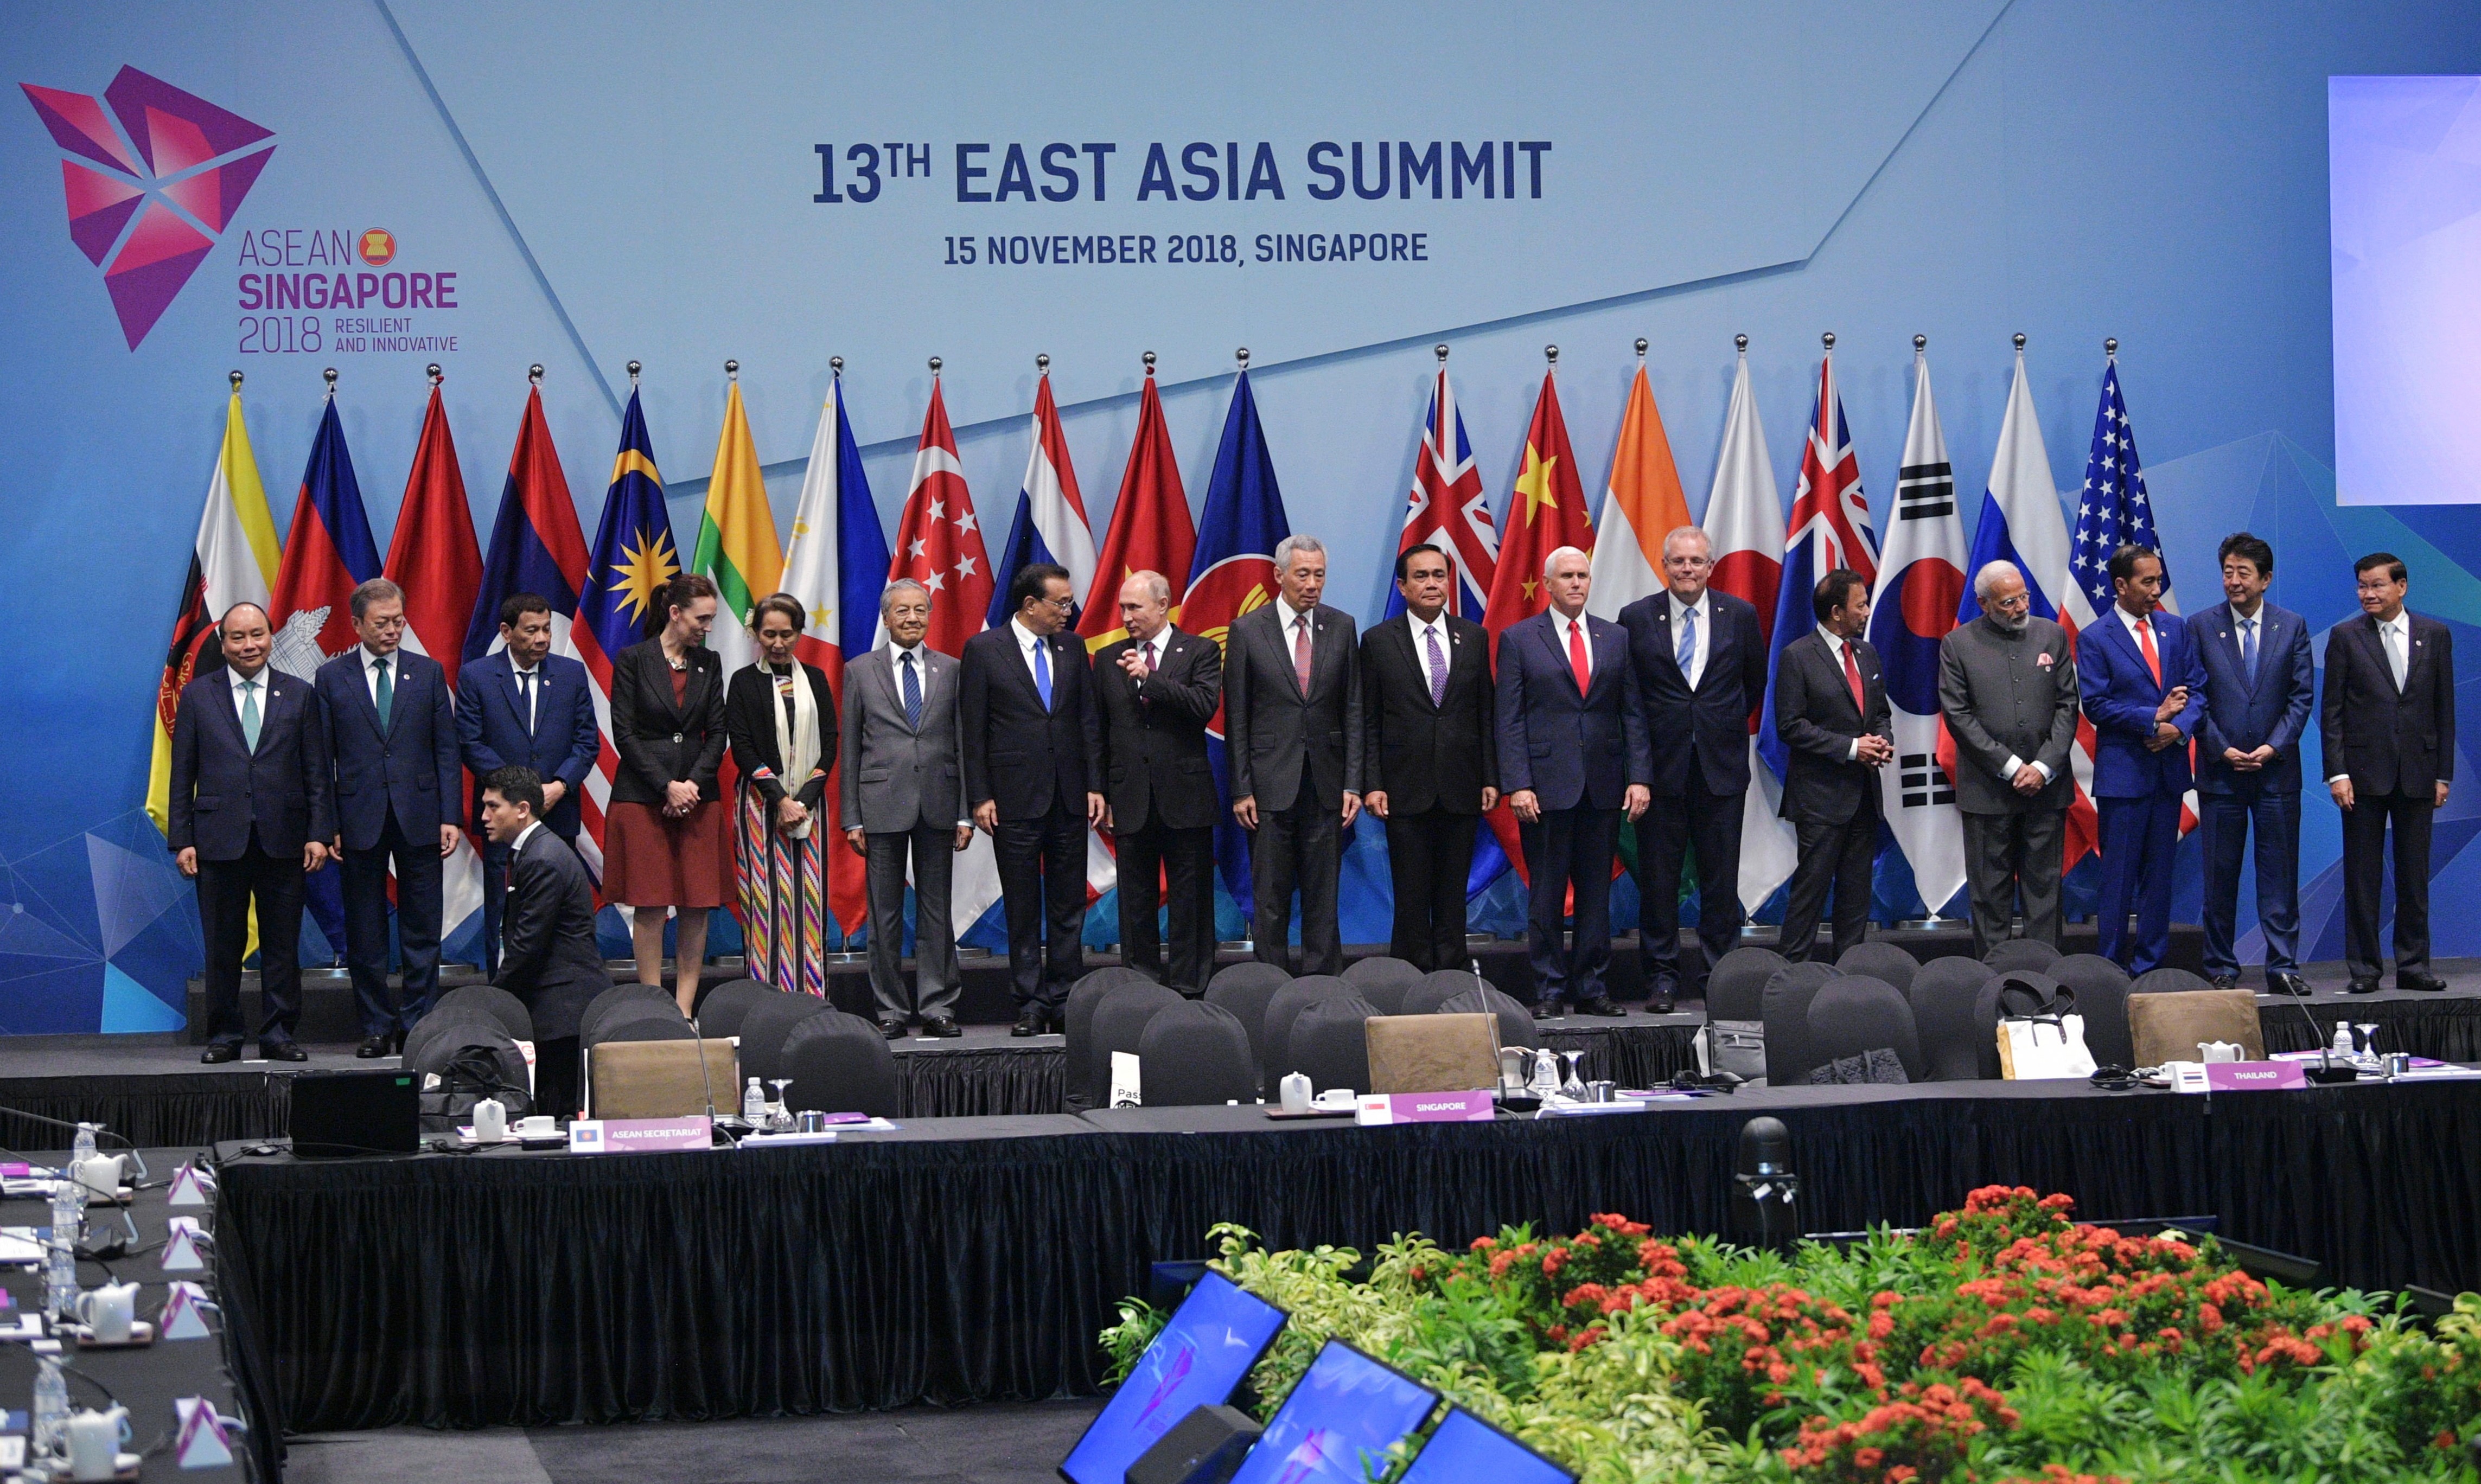 East Asia Summit leaders during their meeting in Singapore. Photo: EPA